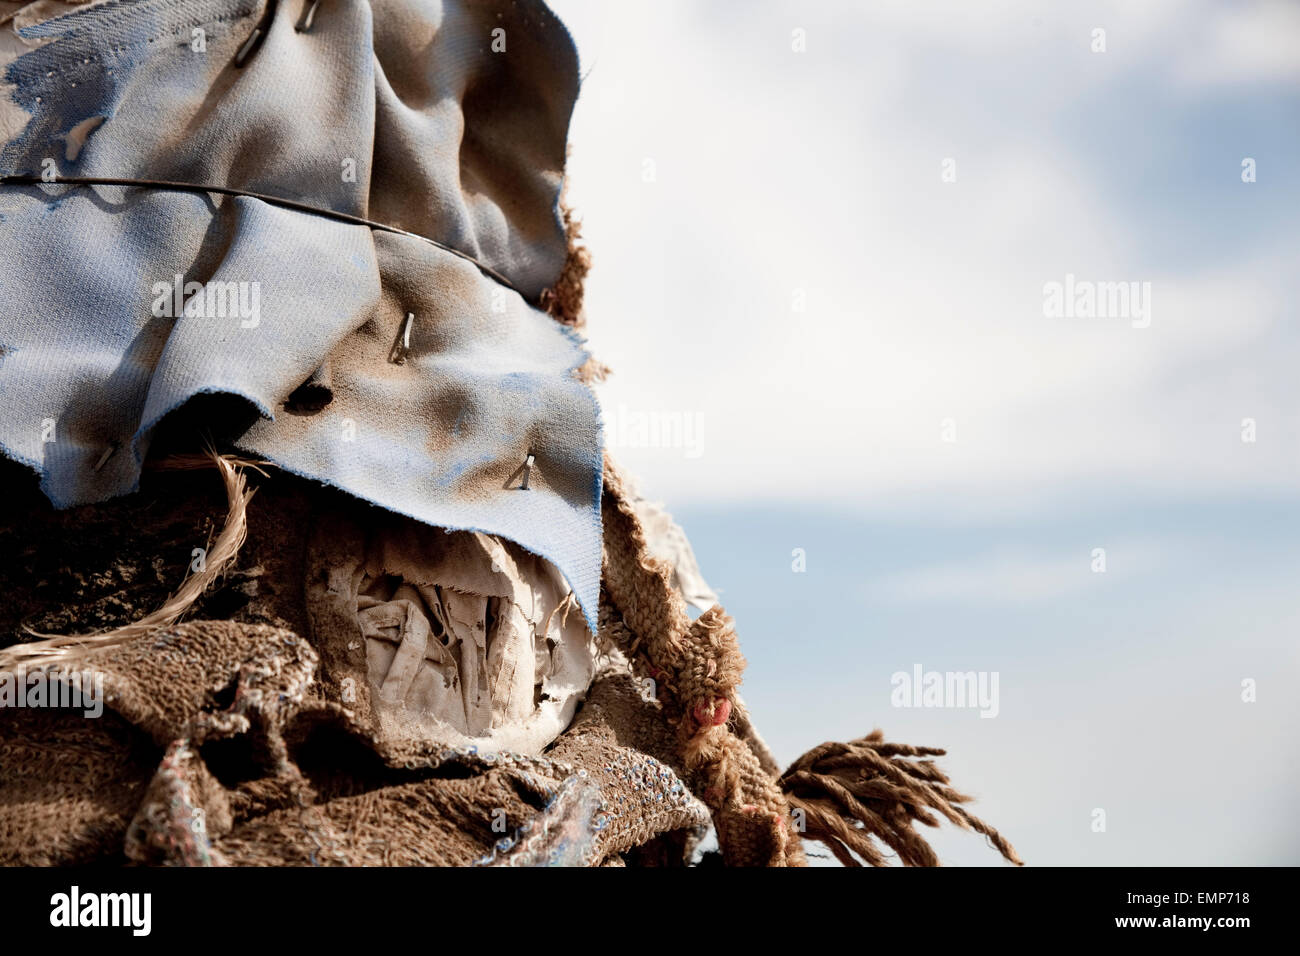 Detail of a pole in the desert near Joshua Tree, California, wrapped in torn and textured fabric. Stock Photo